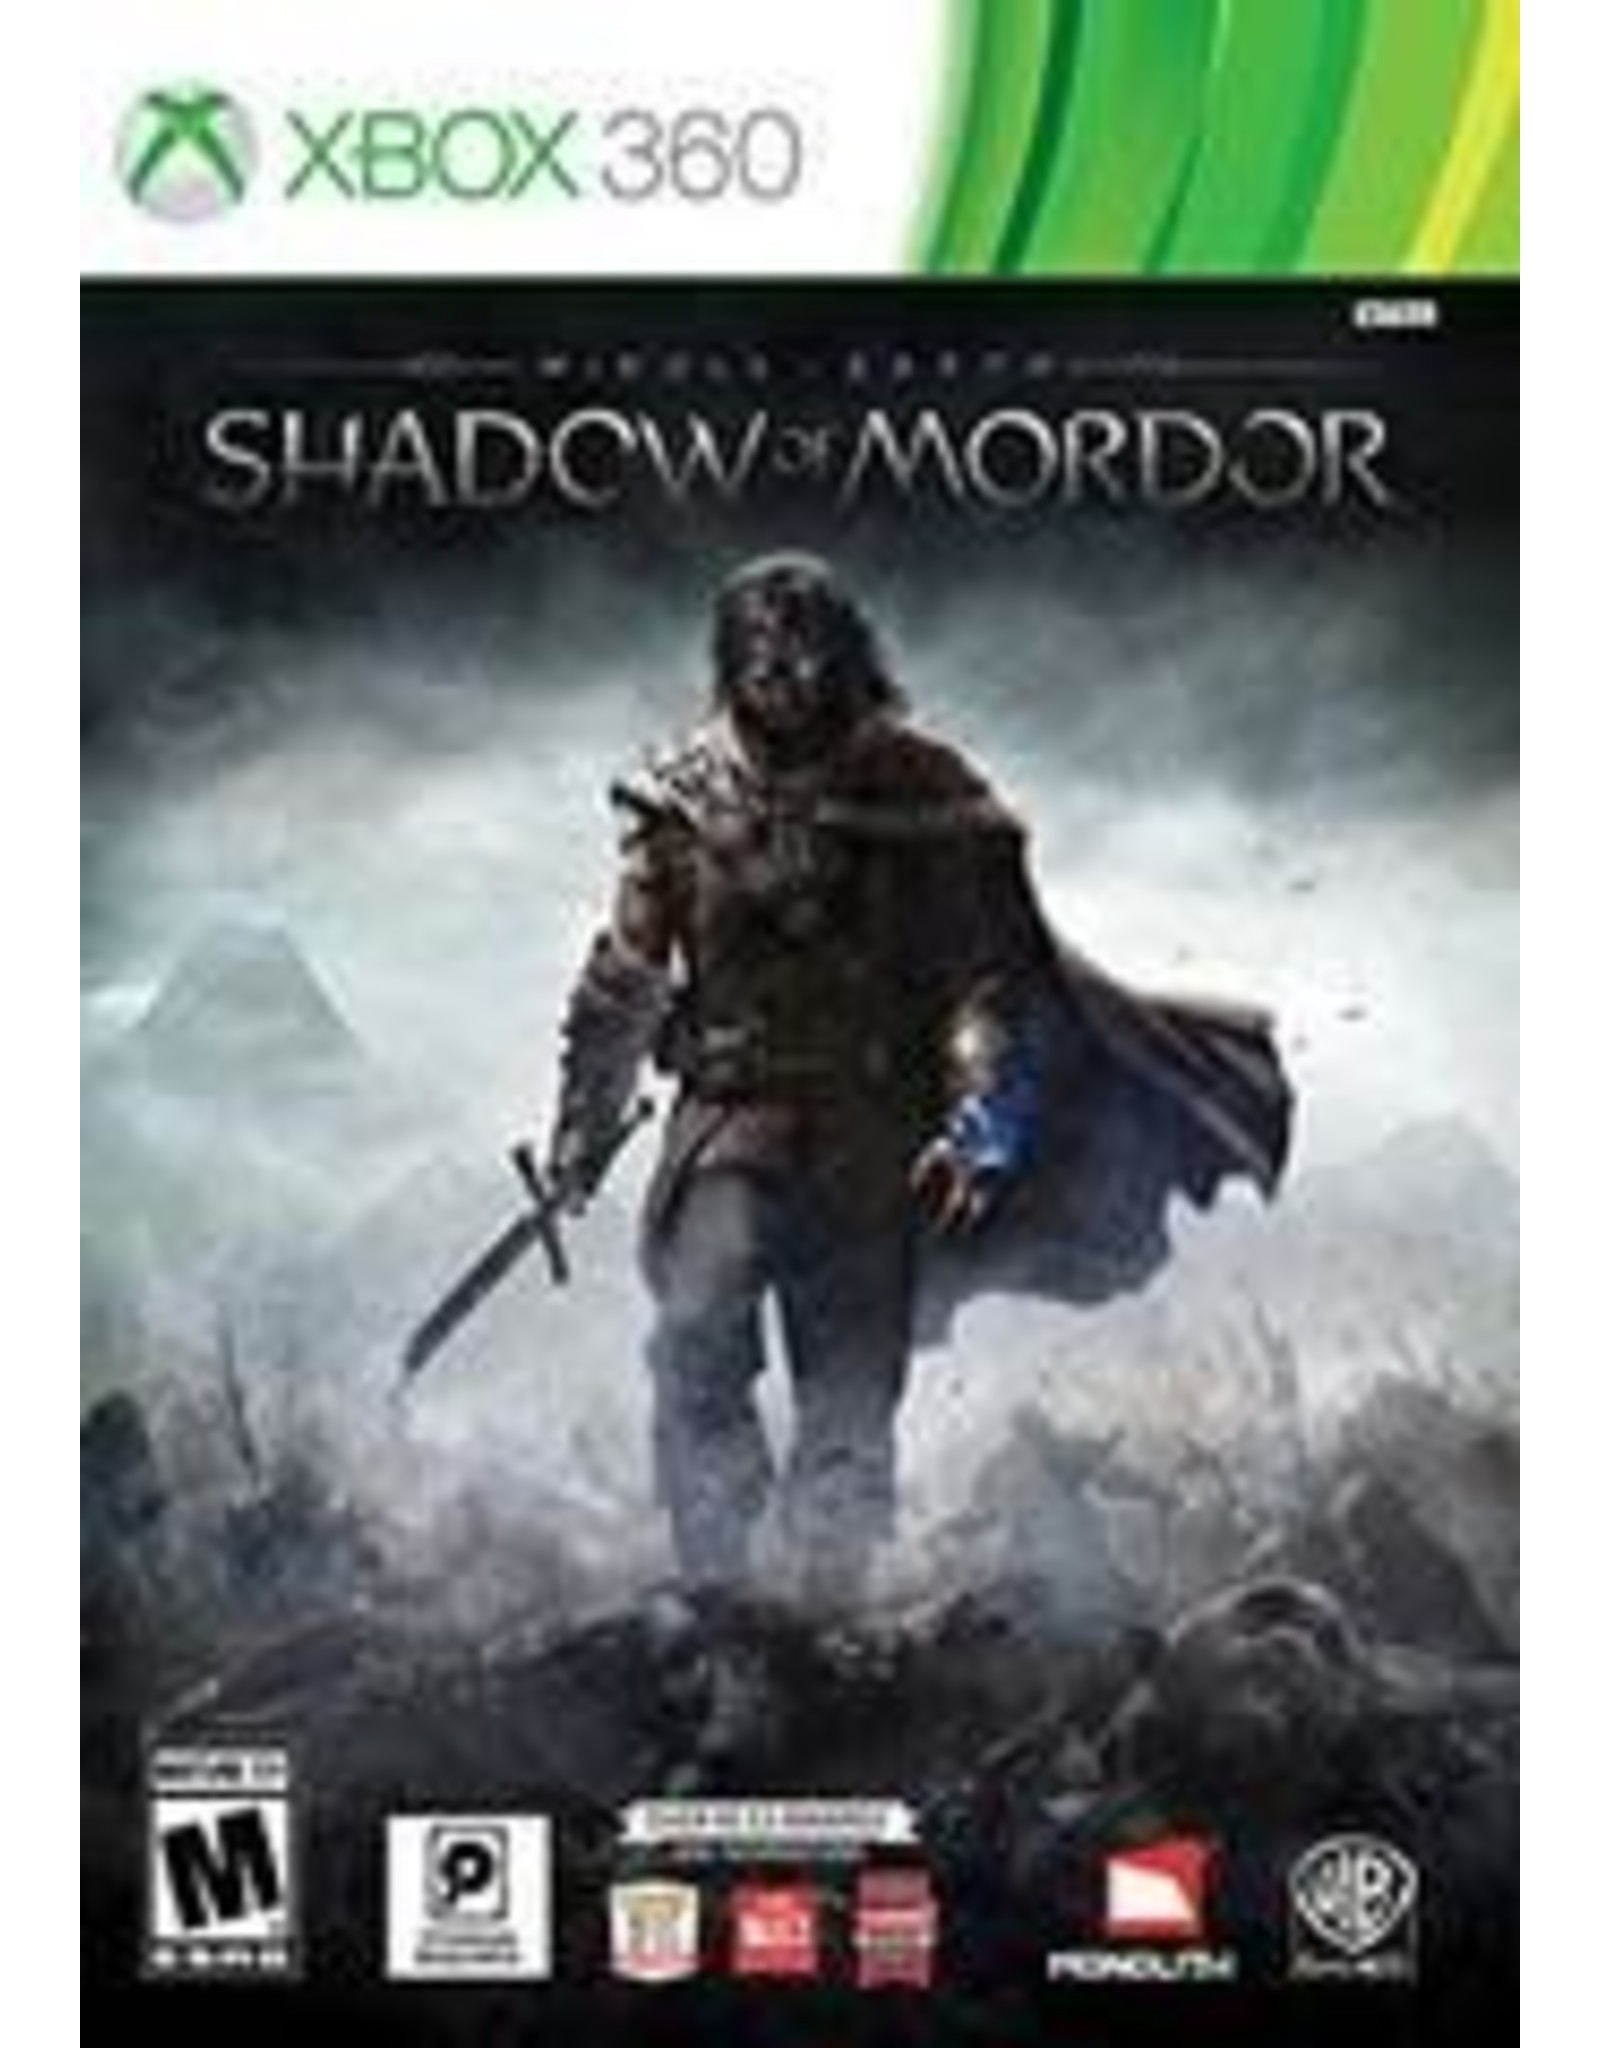 Xbox 360 Middle Earth: Shadow of Mordor (Used)